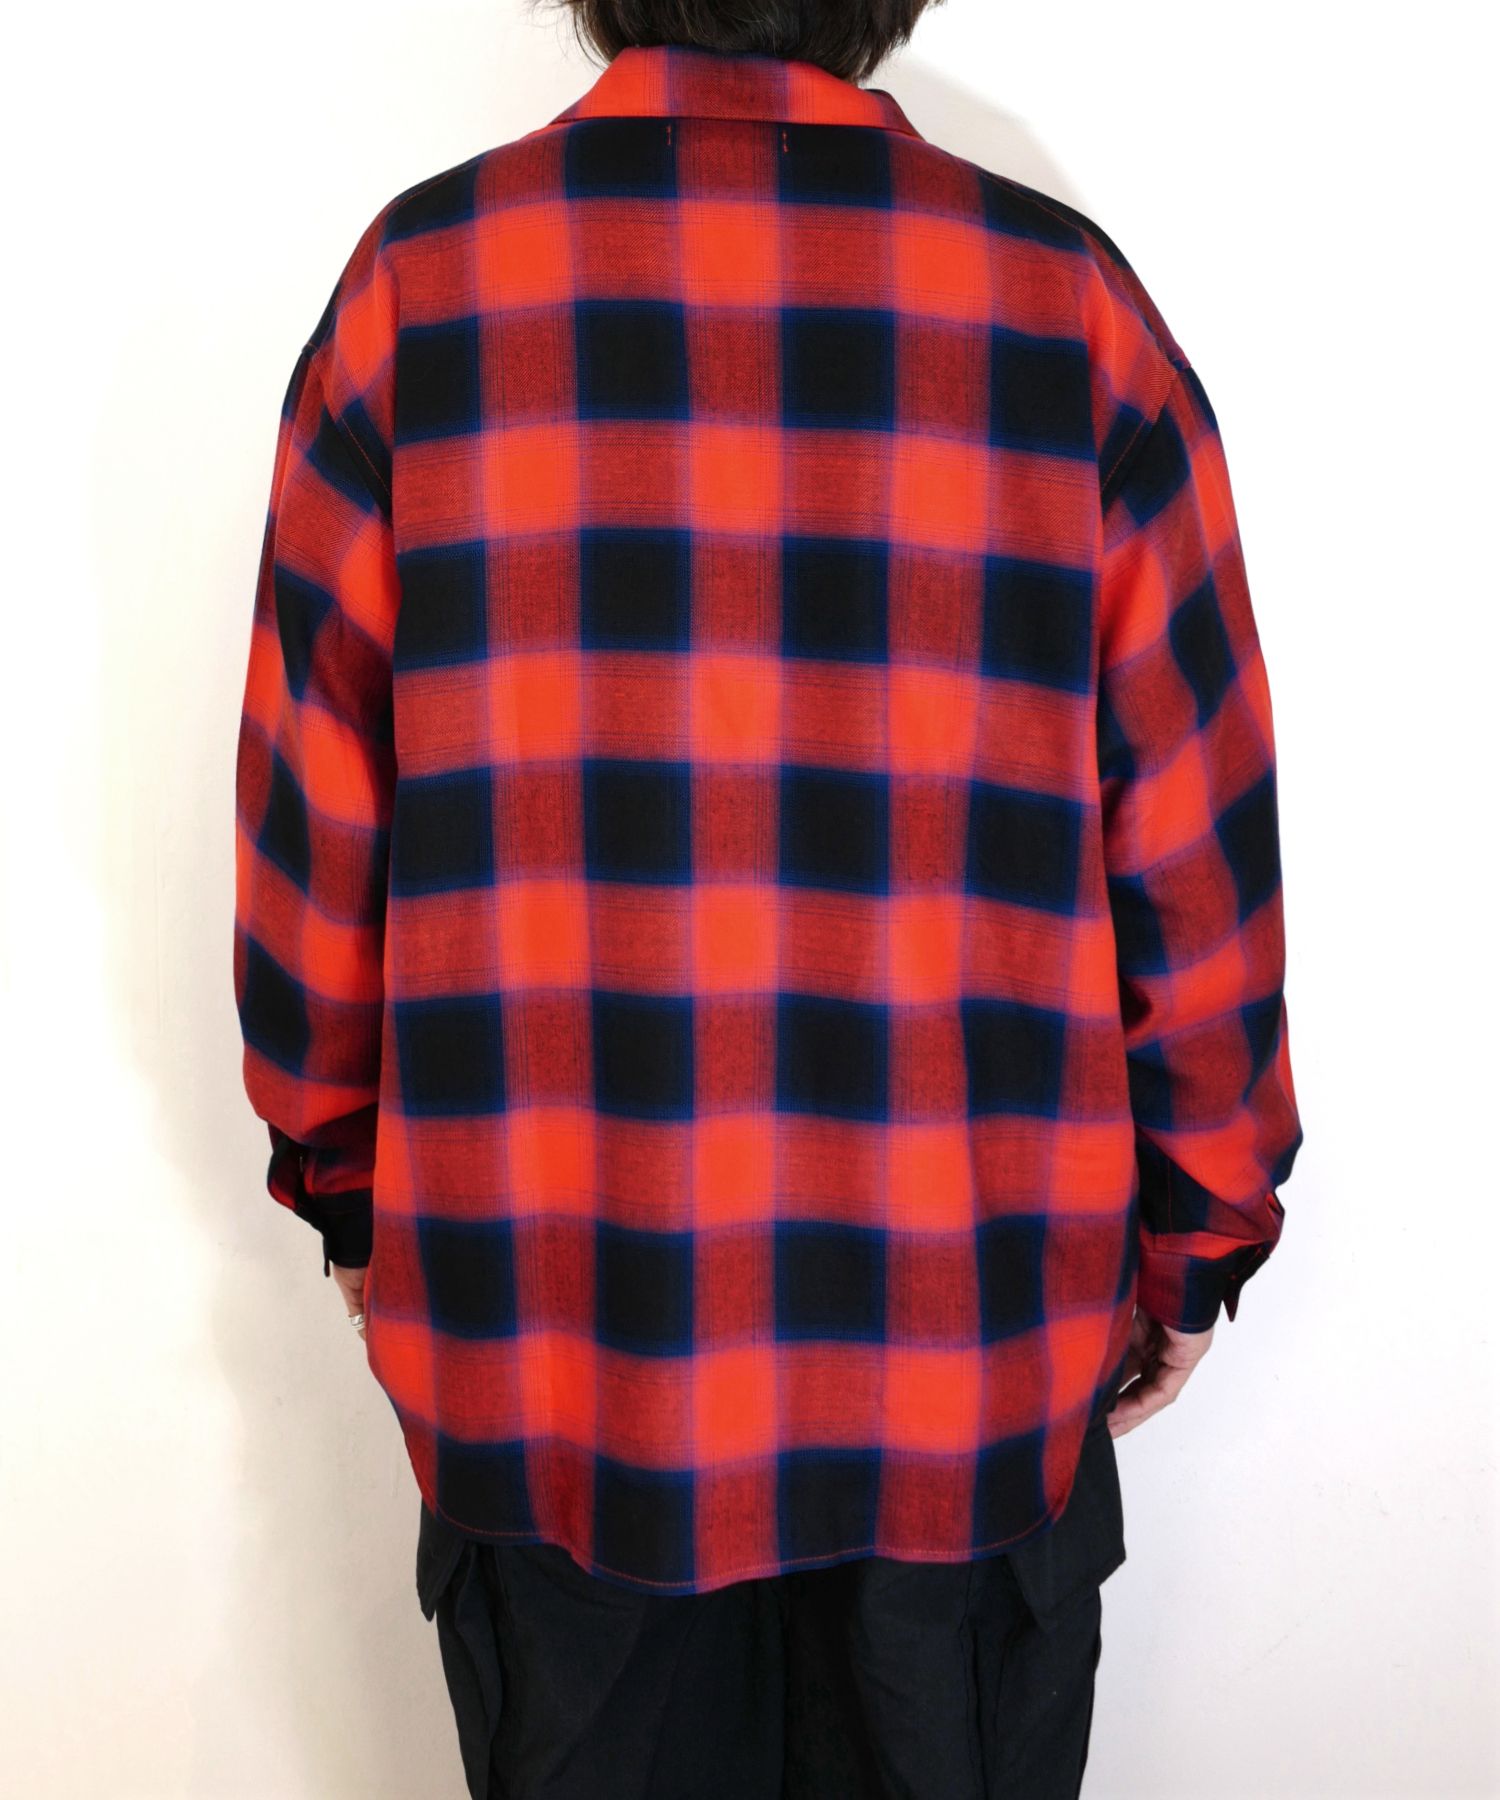 ROTTWEILER - 【ラスト1点】R9 OMBRE L/S SHIRT (RED) / オンブレ 